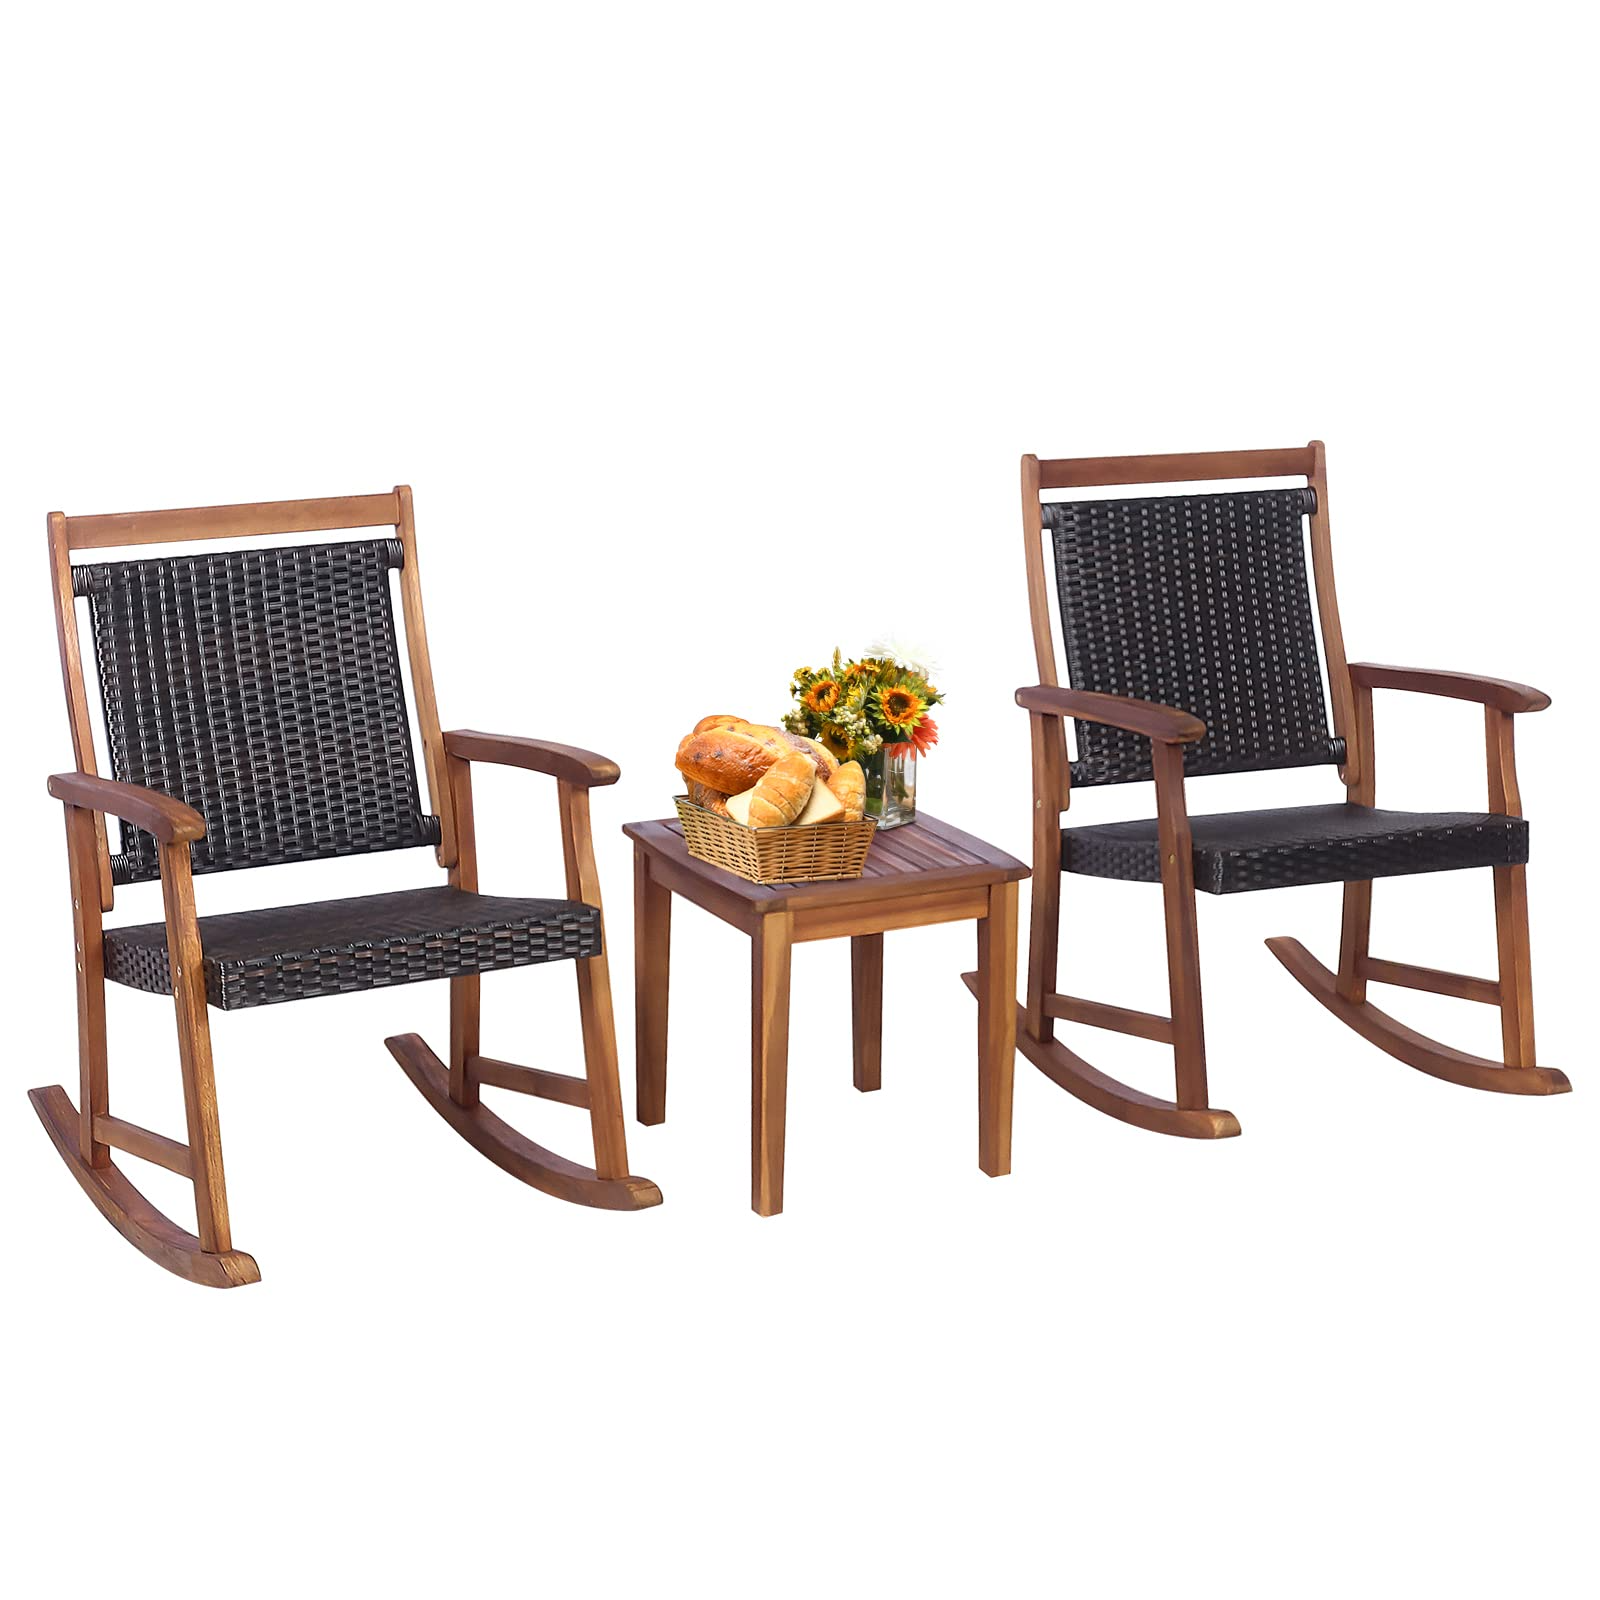 Tangkula 3 Pieces Patio Rocking Chair Set, Patiojoy Acacia Wood Rocker with Side Table, Outdoor Rocking Chairs with Wicker Rattan Seat & Backrest